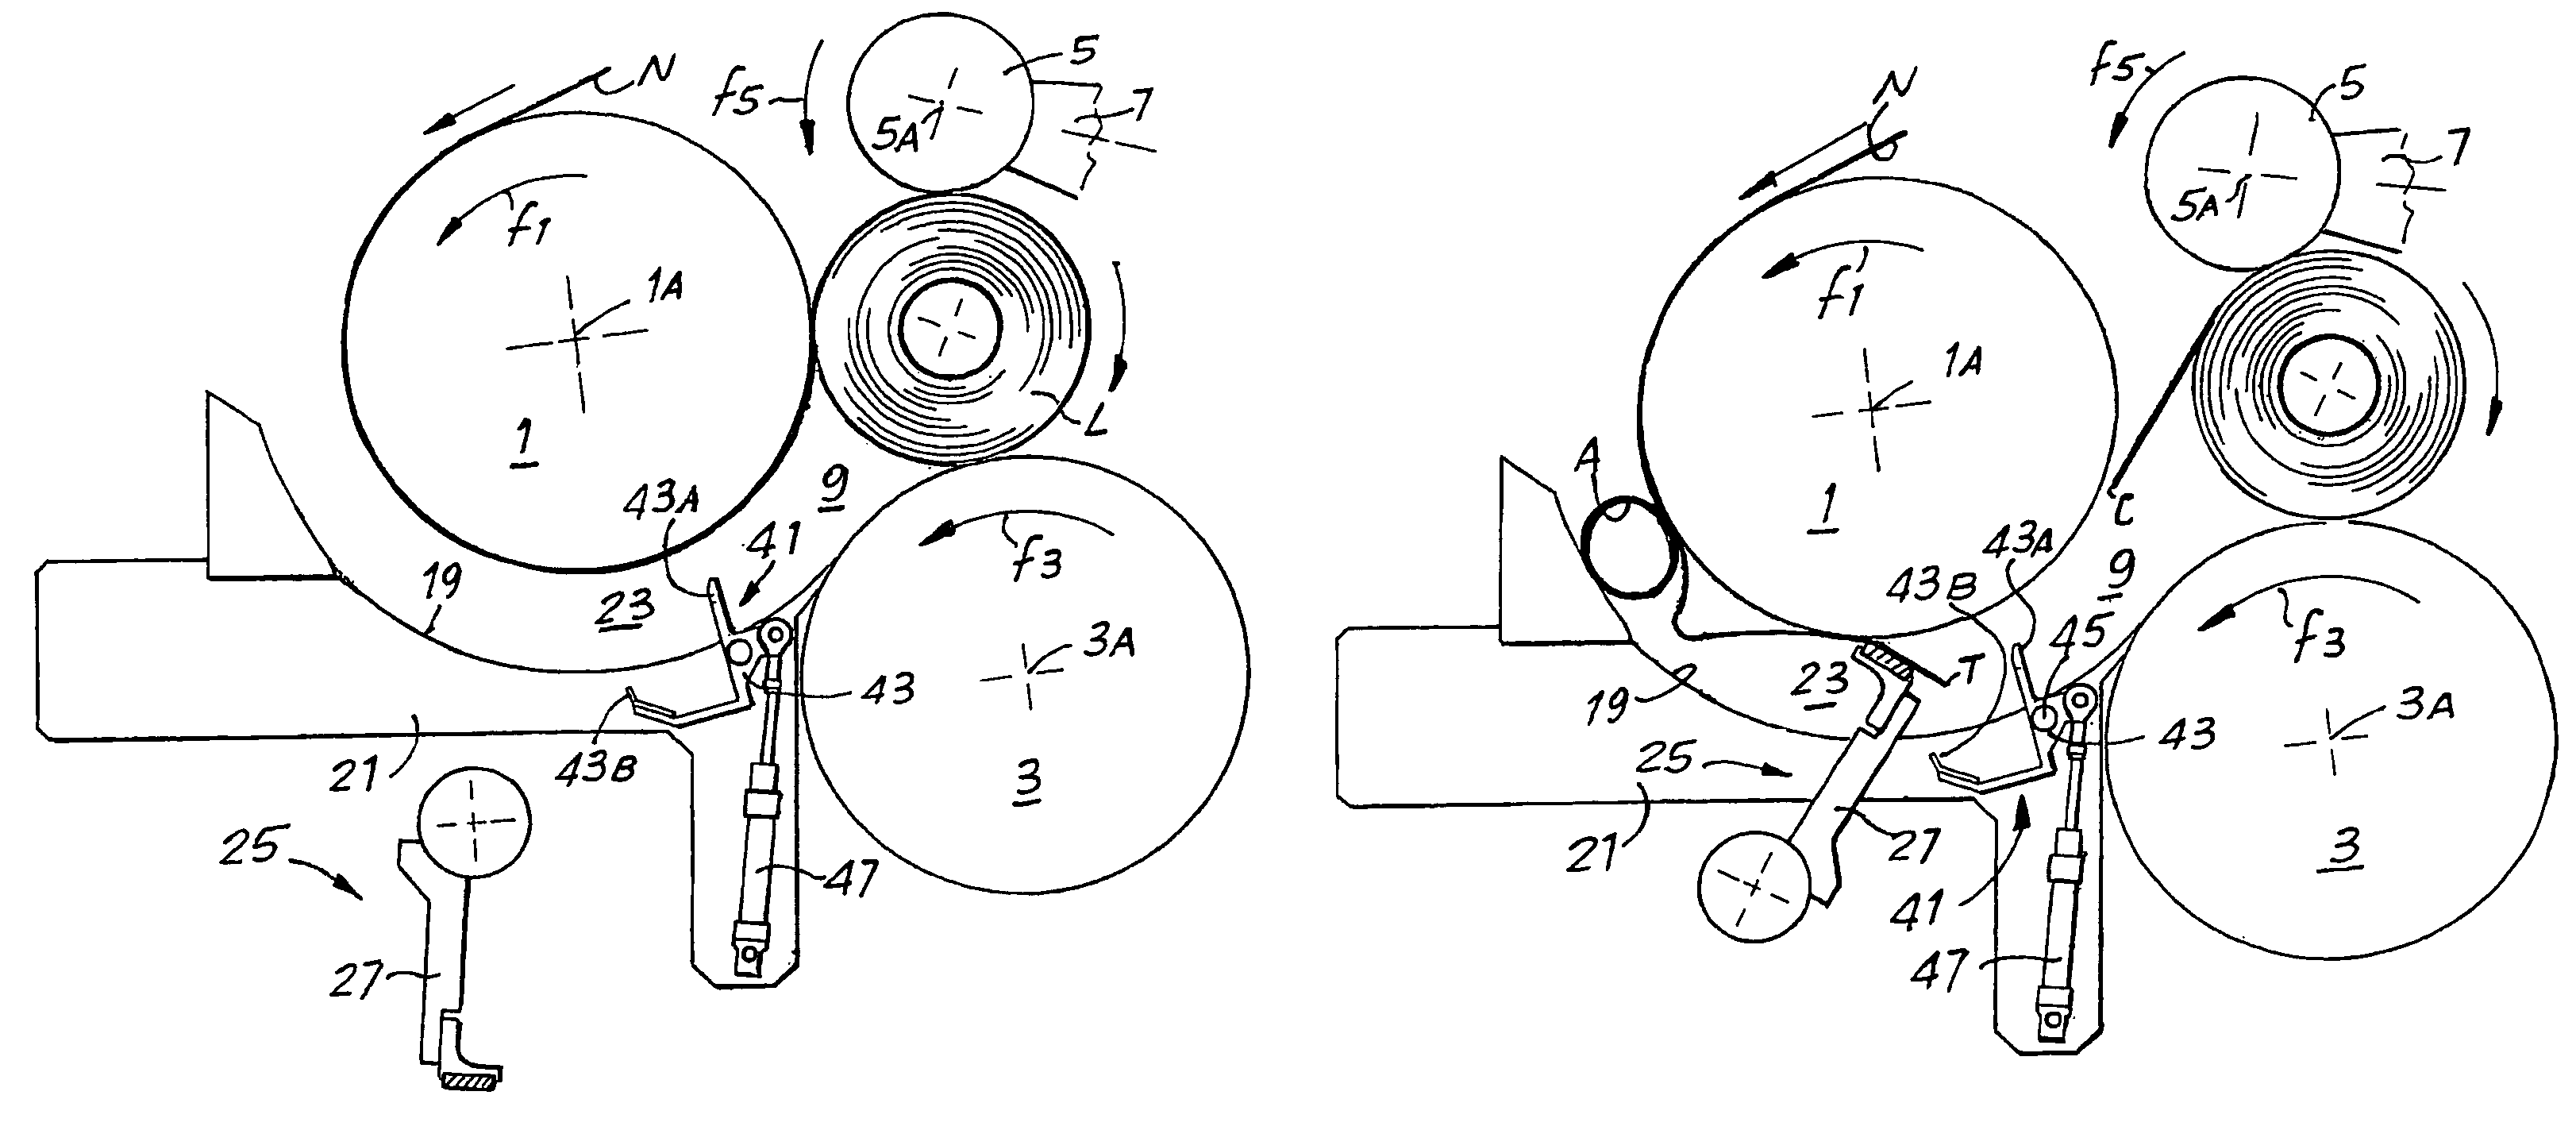 Method and machine for forming logs of web material, with a mechanical device for forming the initial turn of the logs